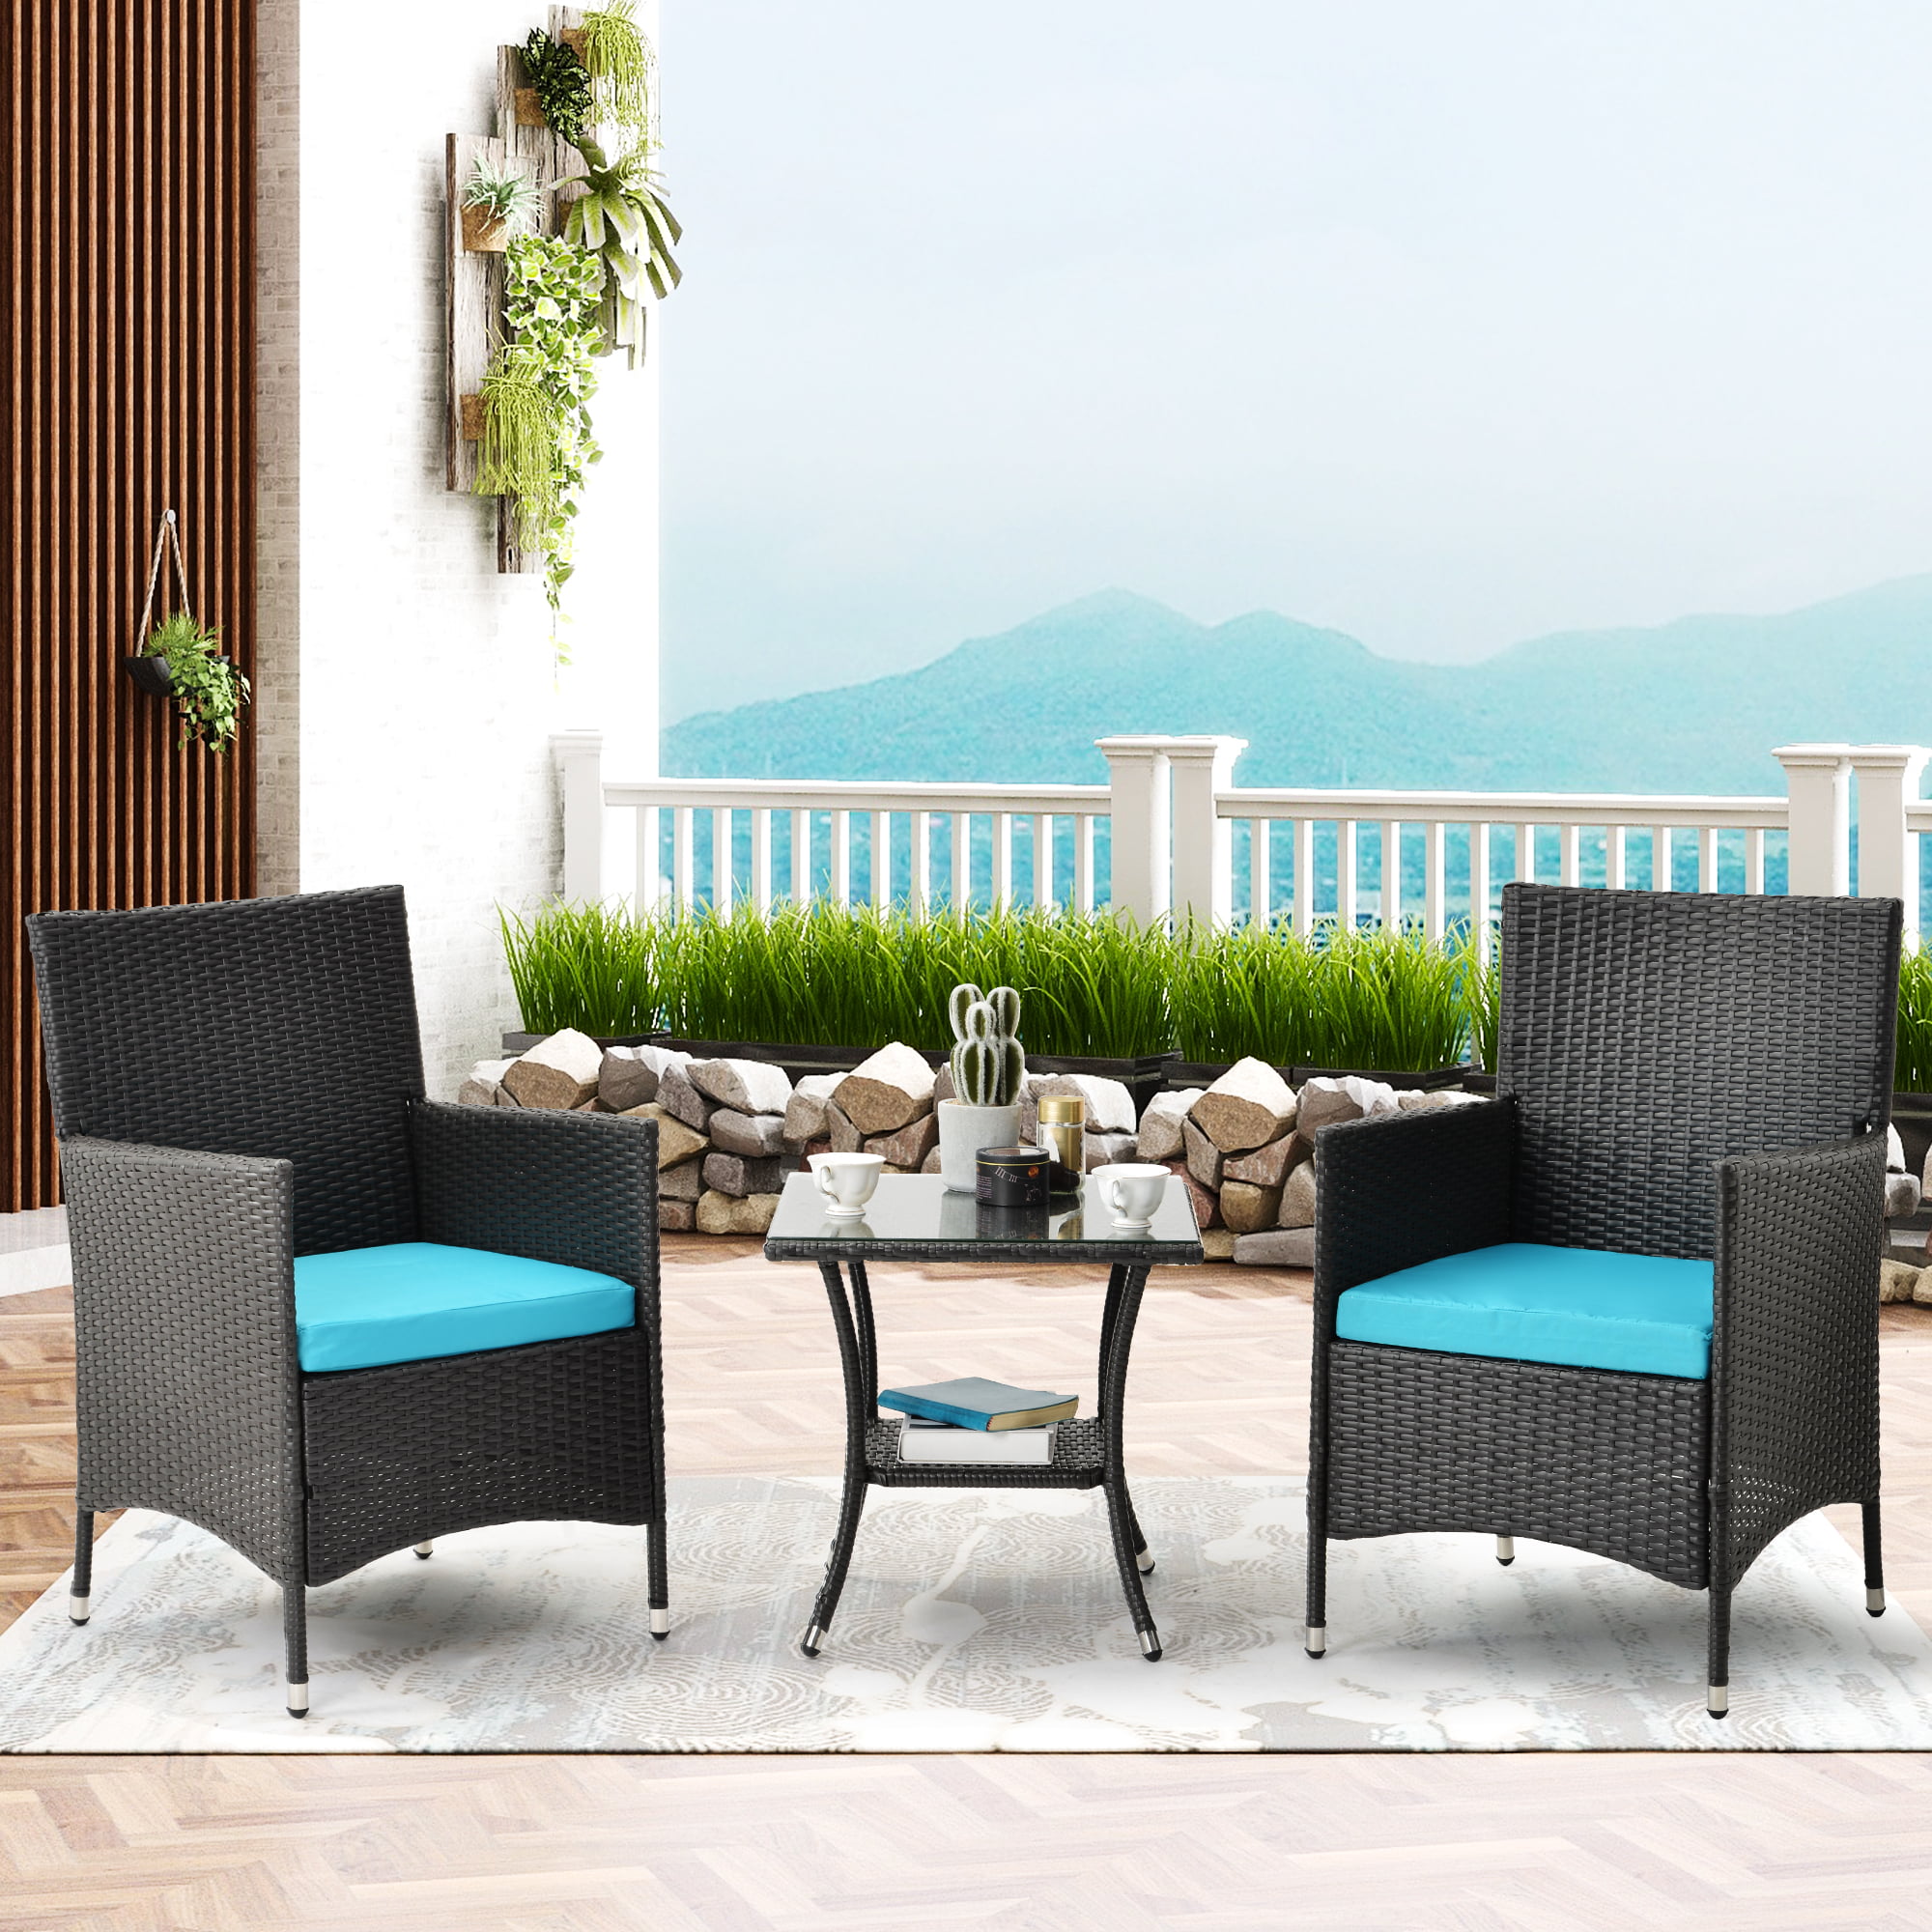 Wholesale Outdoor Furniture: How To Find Quality Pieces At Affordable Prices